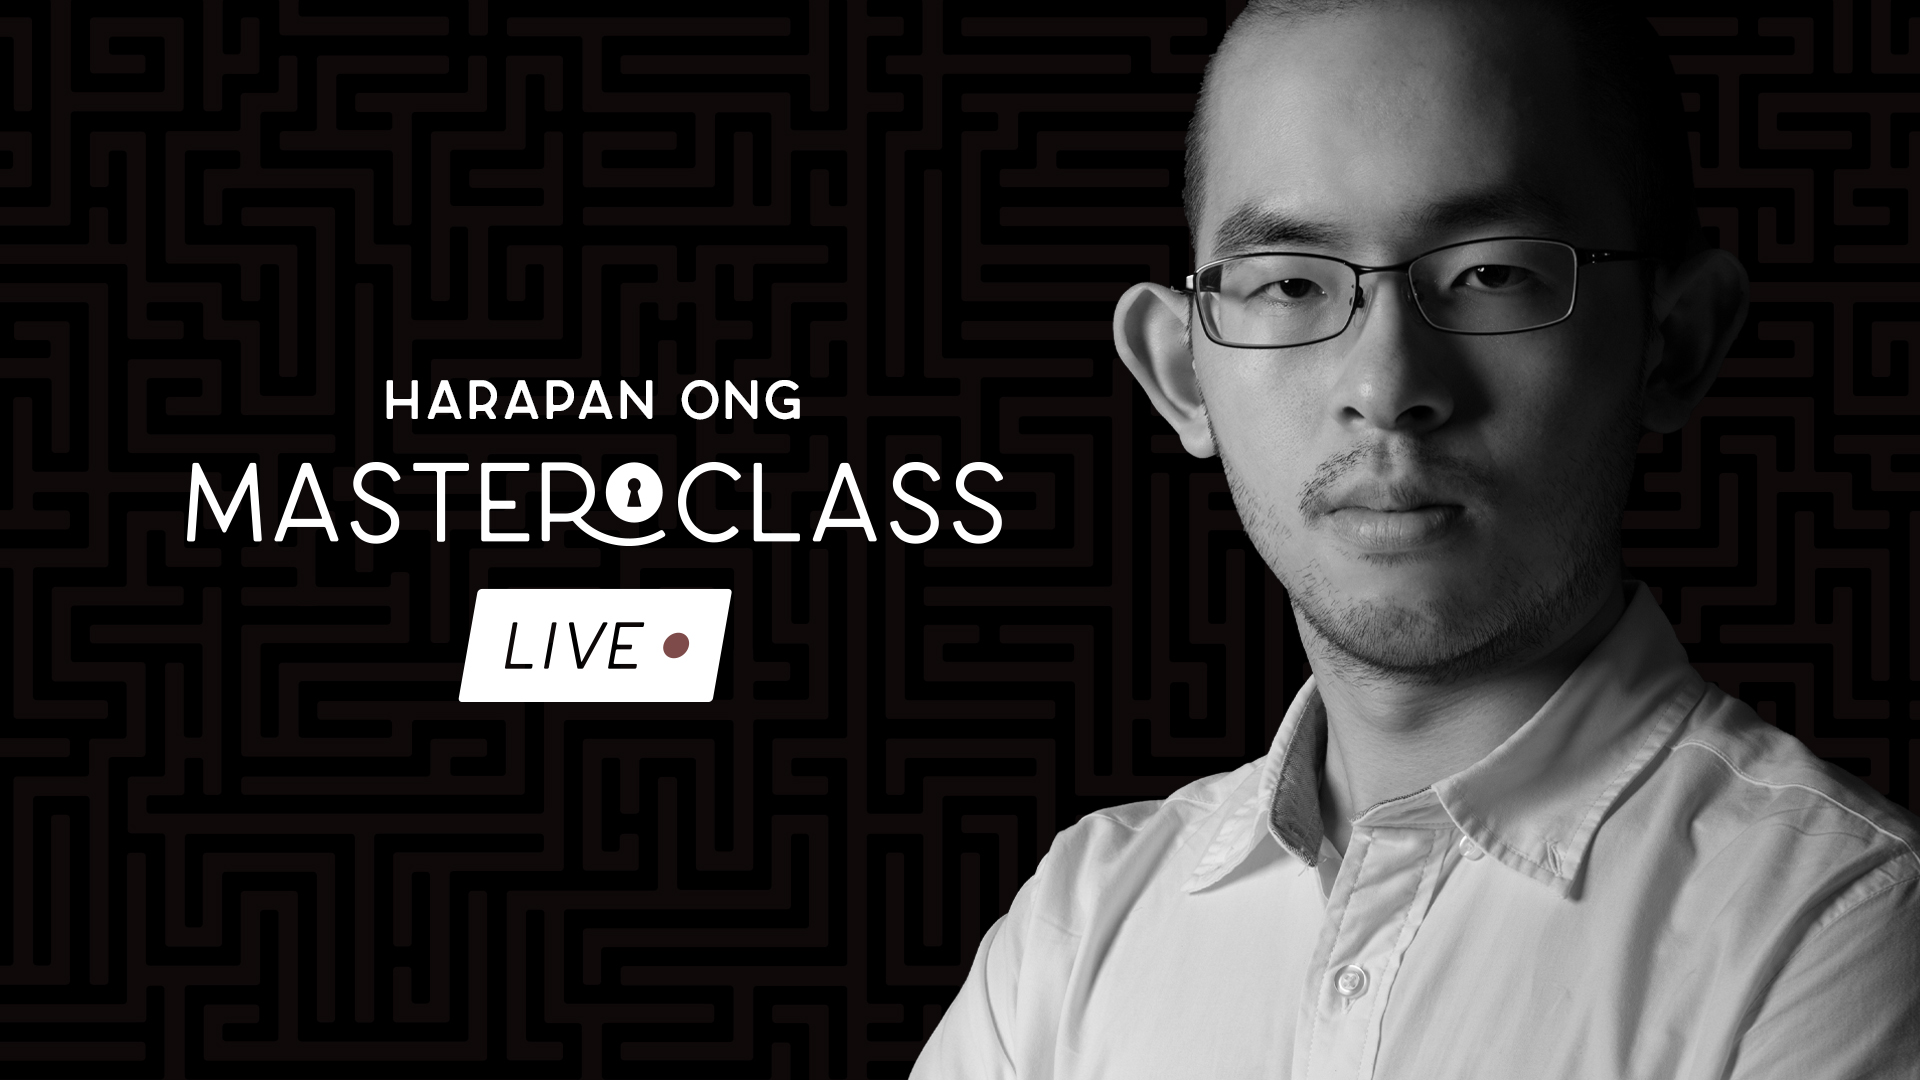 Harapan Ong - Masterclass Live Lecture (Week 3, Zoom Chat) (MP4 Video Download 720p High Quality)